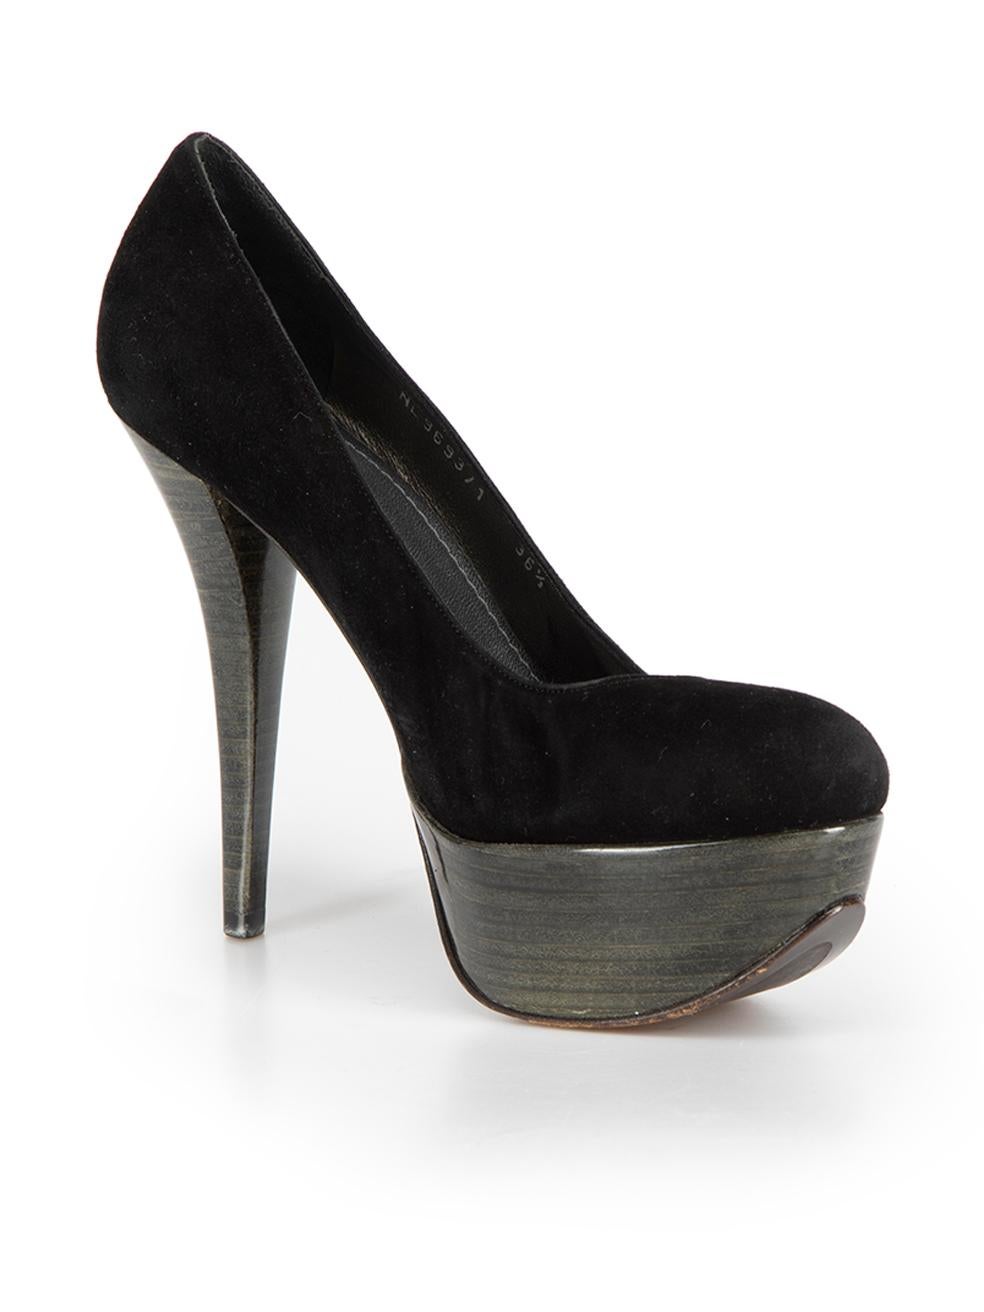 CONDITION is Very good. Minimal wear to shoes is evident. Minimal wear to the right shoe heel with scuffing on this used Stuart Weitzman designer resale item. 



Details


Black

Suede

Slip on pumps

Round toe

Platform high heel





Made in